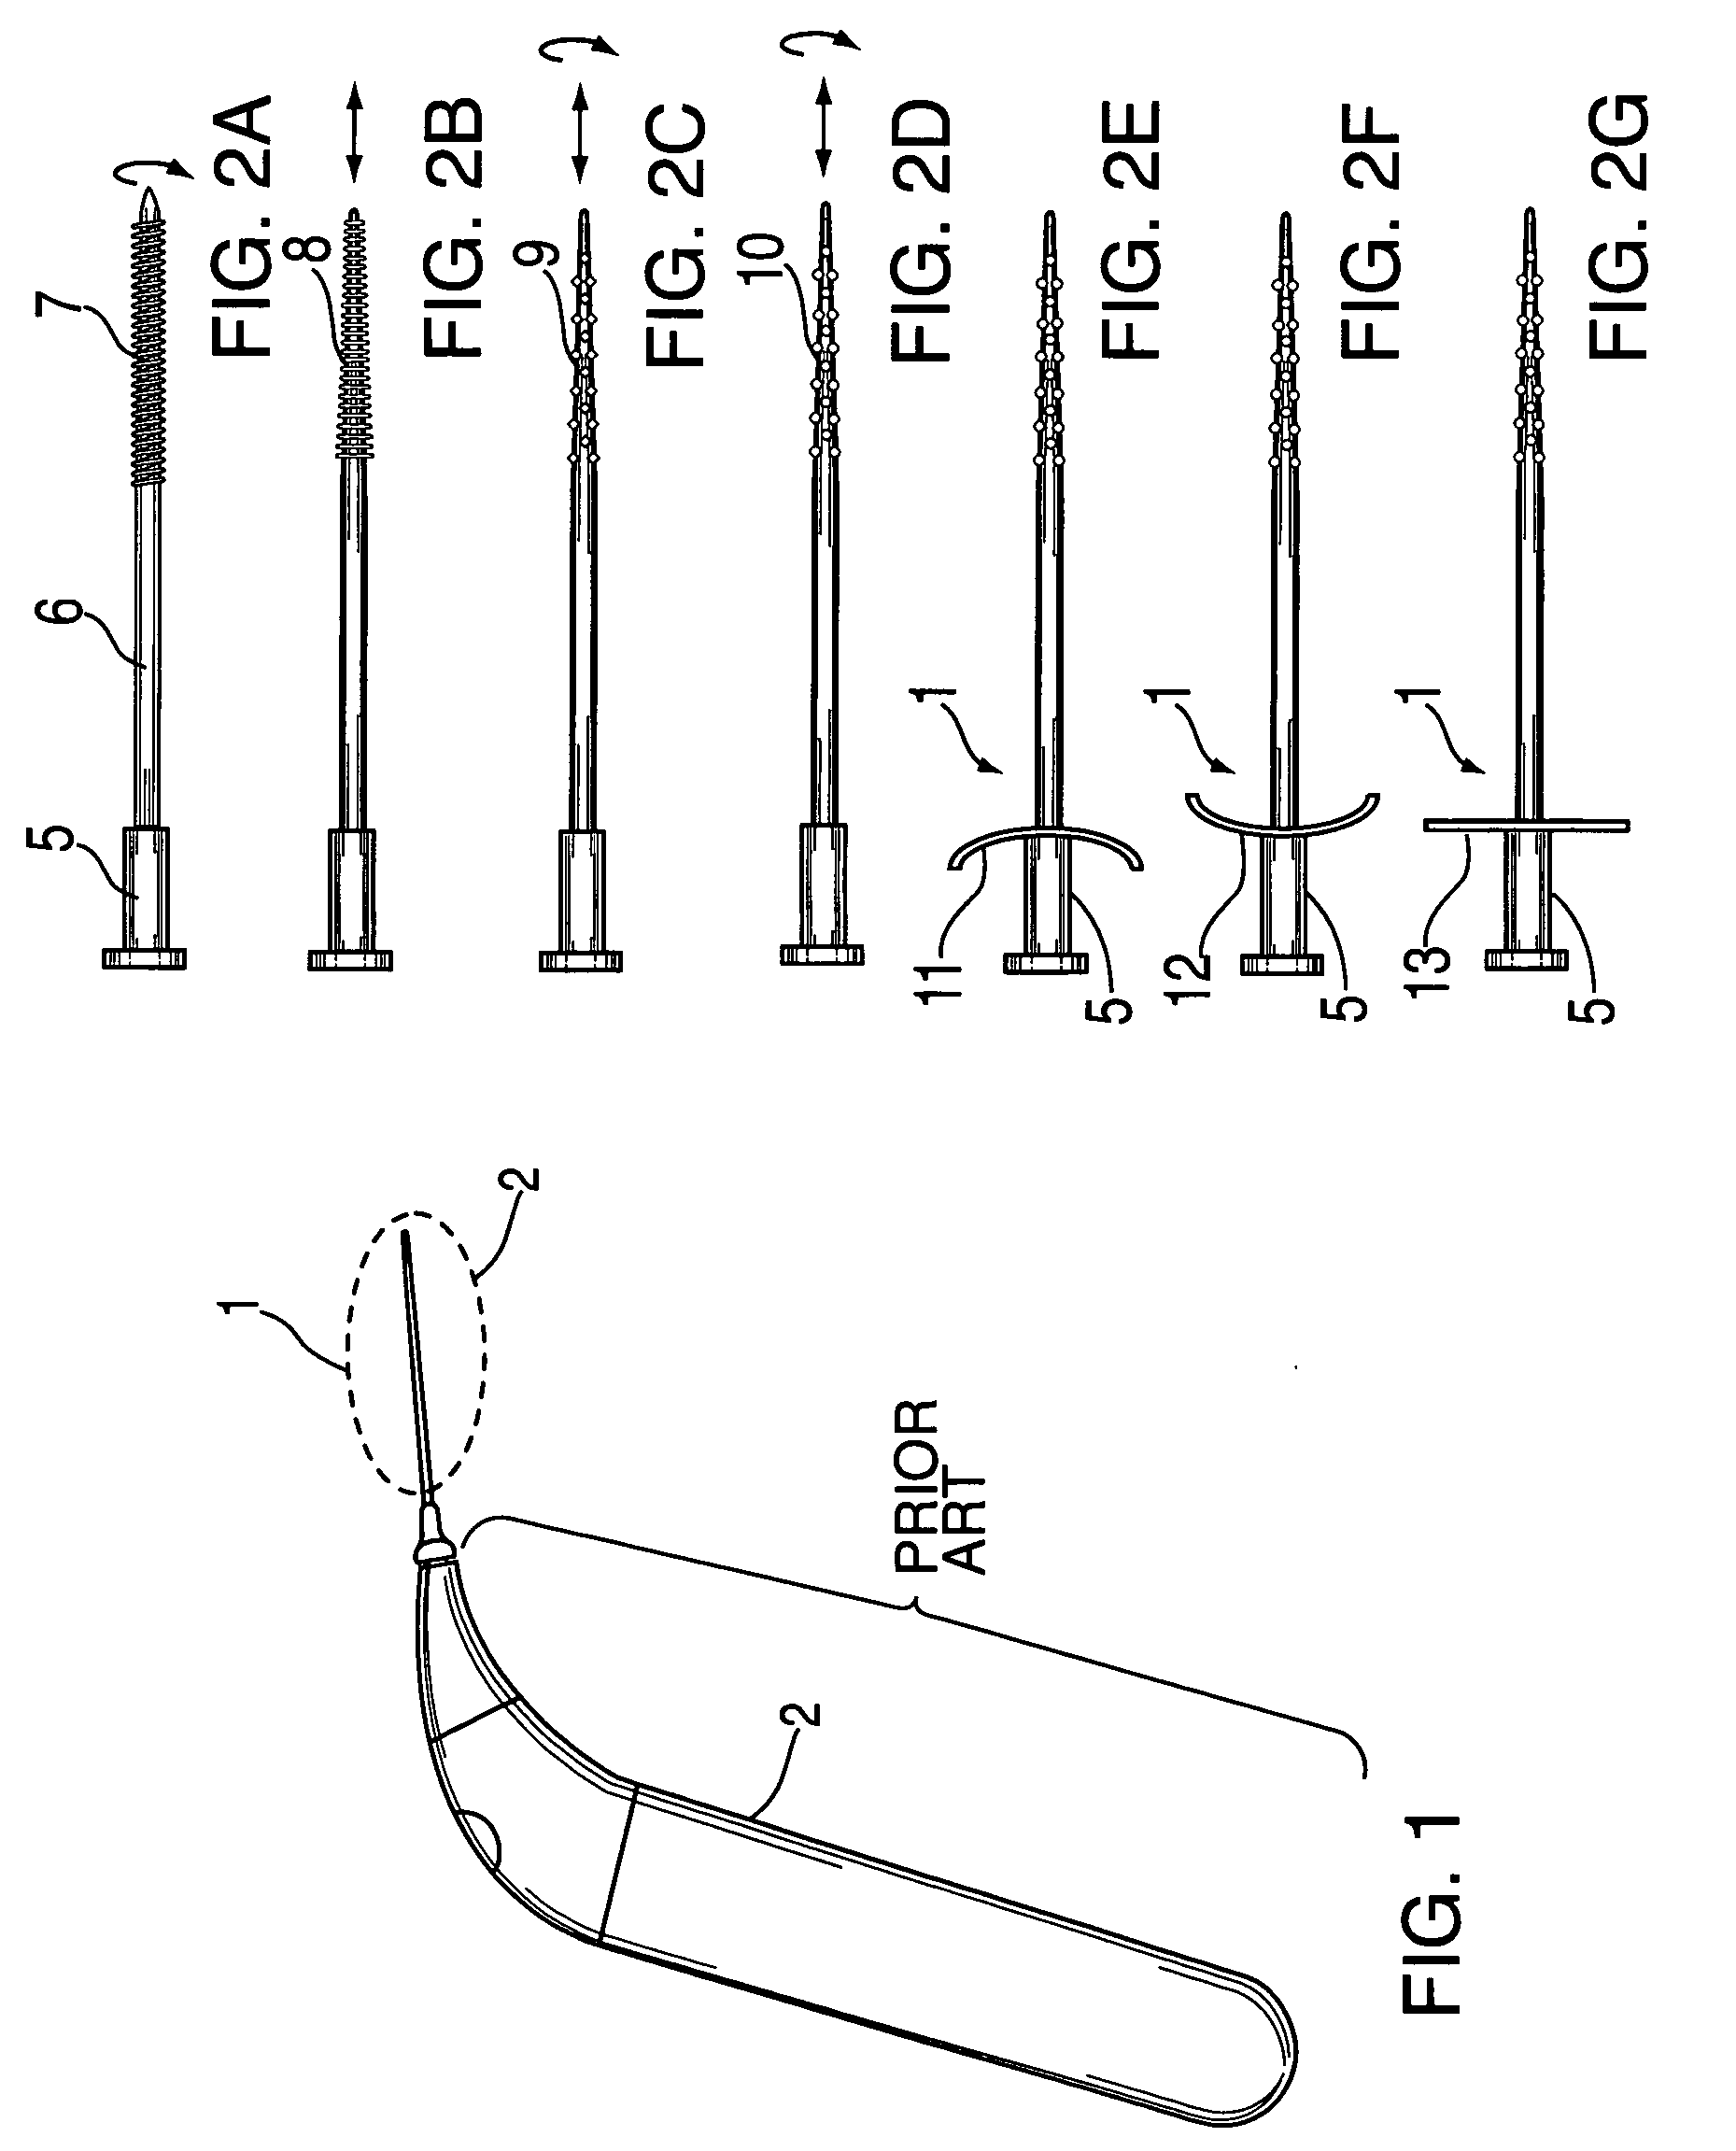 Method and apparatus to remove macro and micro debris from a root canal